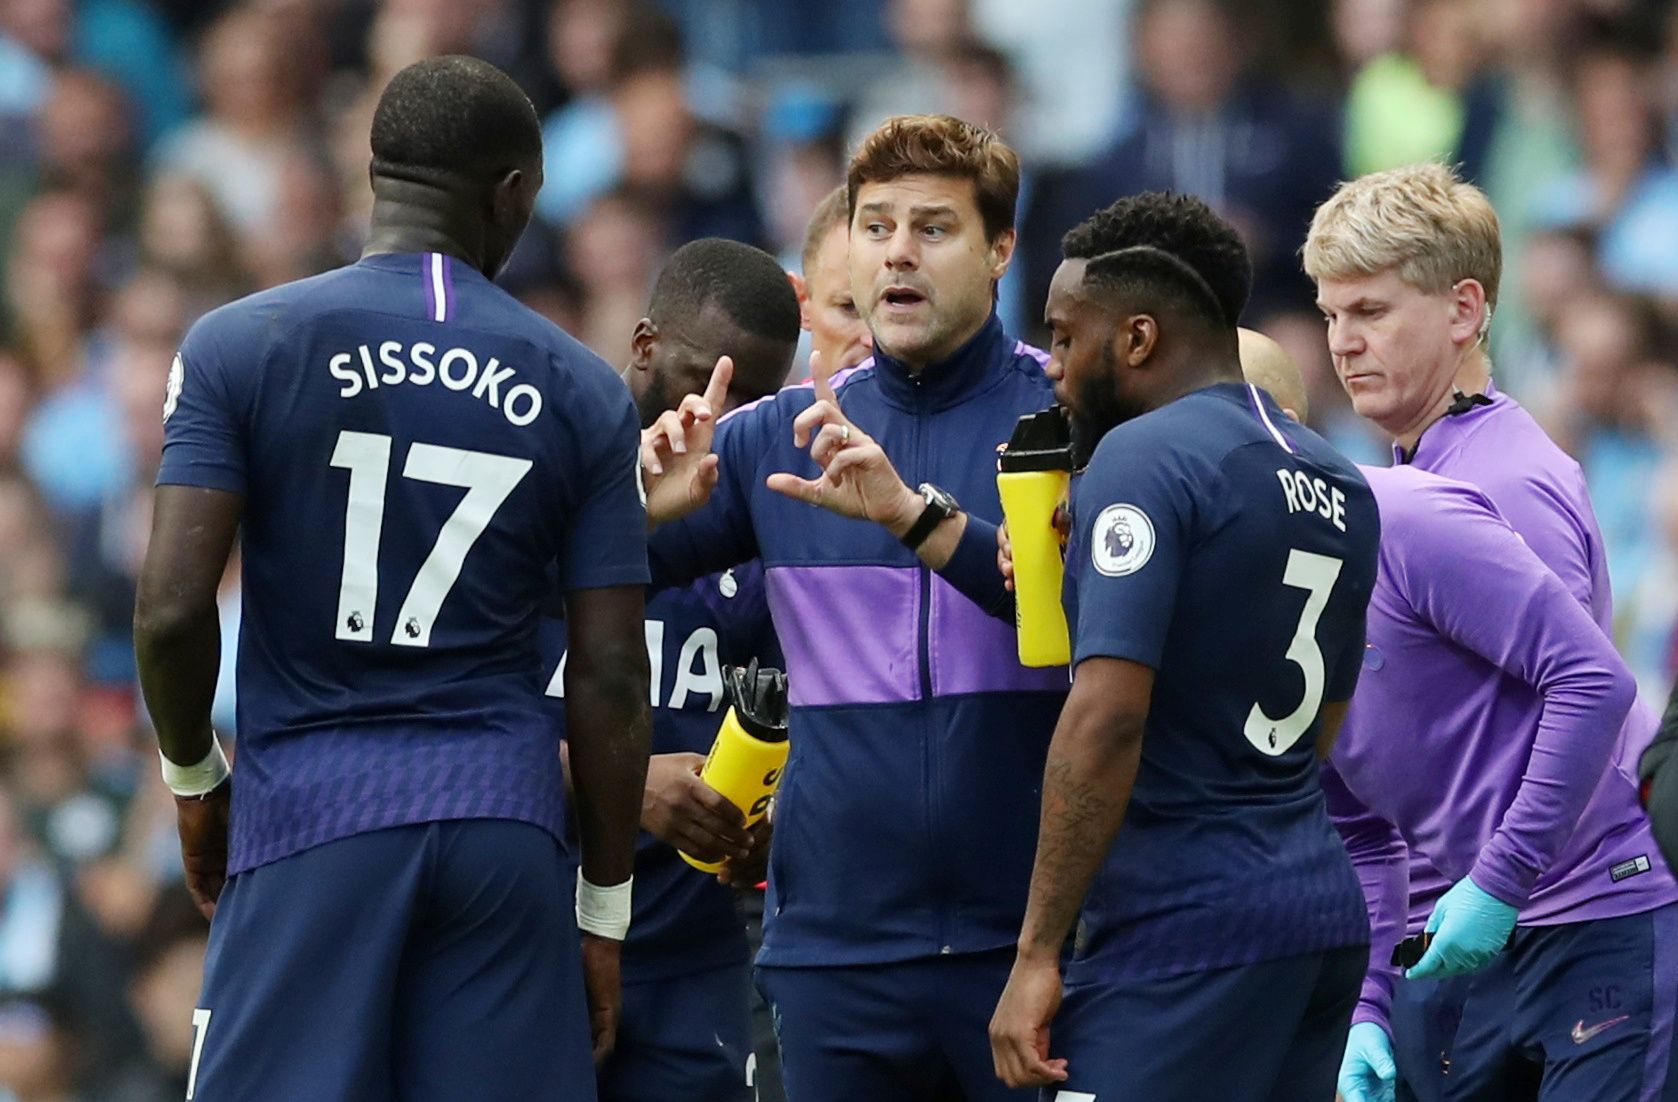 Soccer Football - Premier League - Manchester City v Tottenham Hotspur - Etihad Stadium, Manchester, Britain - August 17, 2019  Tottenham Hotspur manager Mauricio Pochettino gives instructions to Moussa Sissoko and Danny Rose during a break in play Action Images via Reuters/Carl Recine  EDITORIAL USE ONLY. No use with unauthorized audio, video, data, fixture lists, club/league logos or 